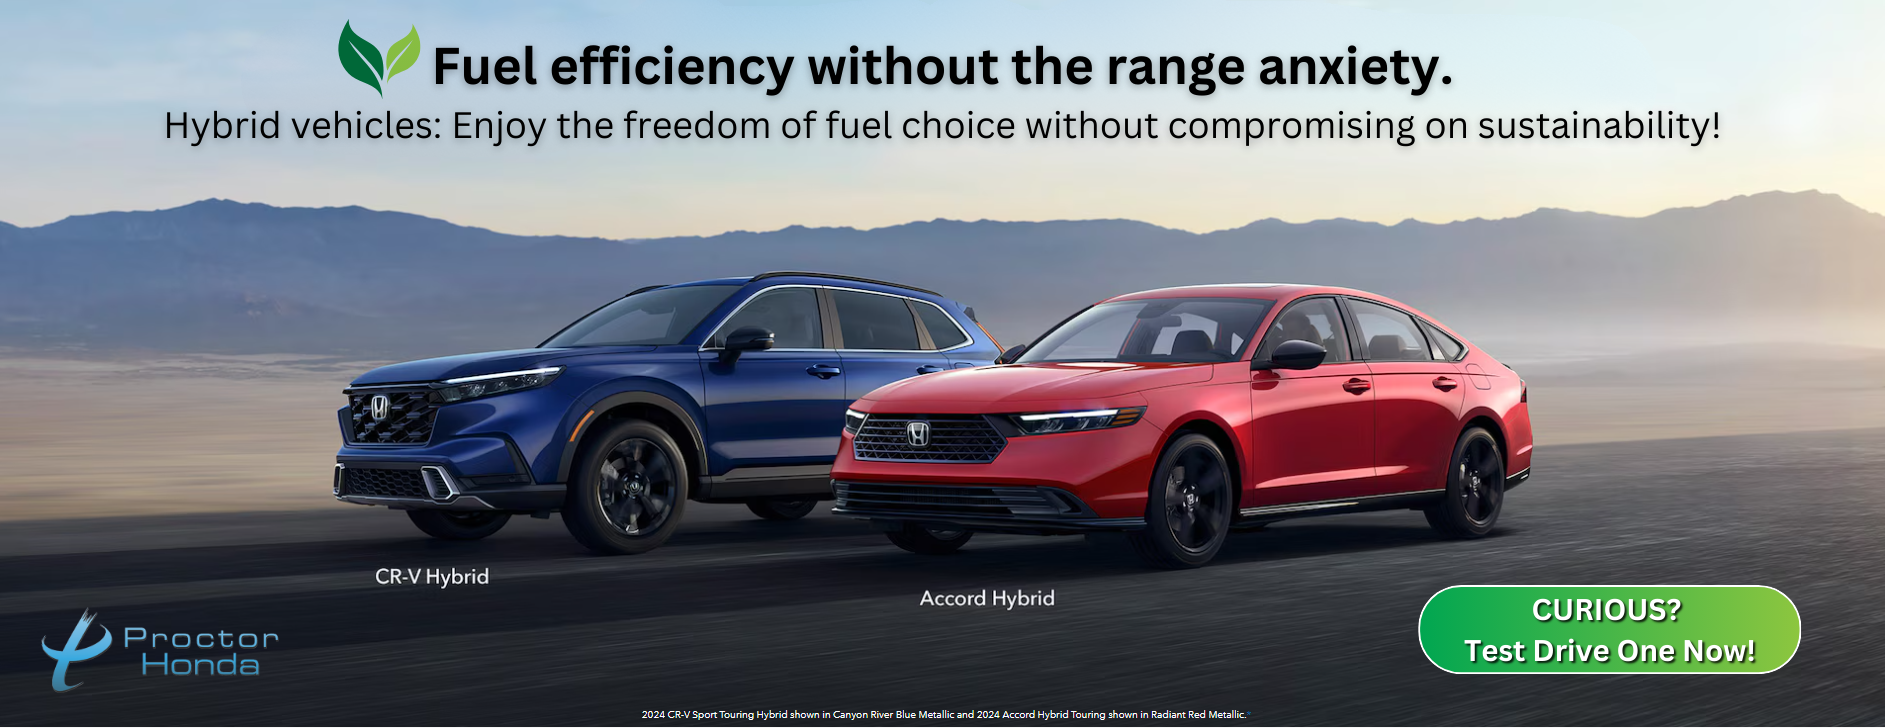 Honda Hybrids Banner - Fuel efficiency without the range anxiety